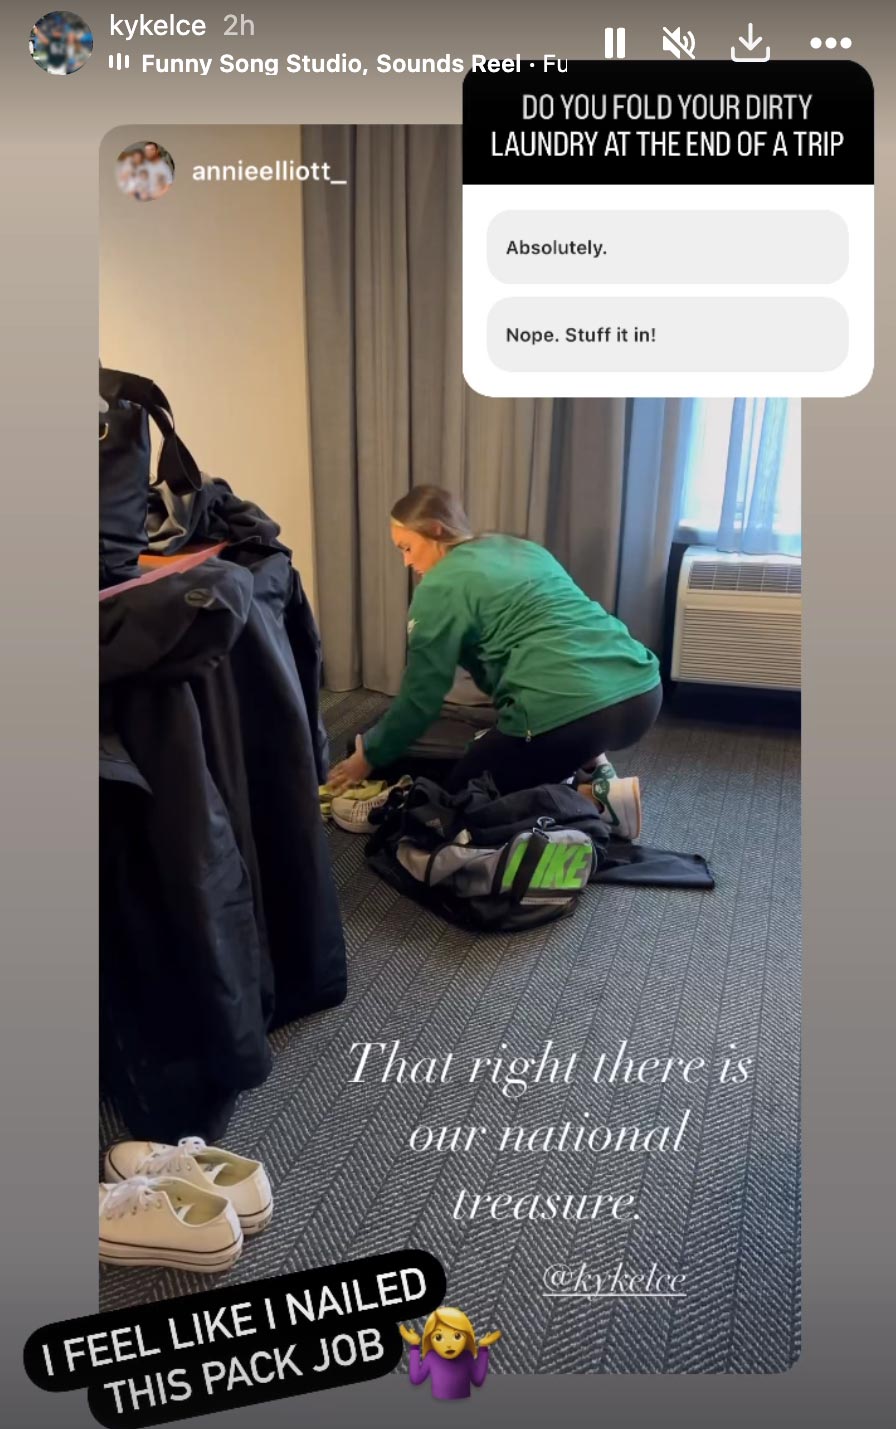 Fellow Eagles Wife Mocks 'National Treasure' Kylie Kelce's Packing Skills After Chiefs Game